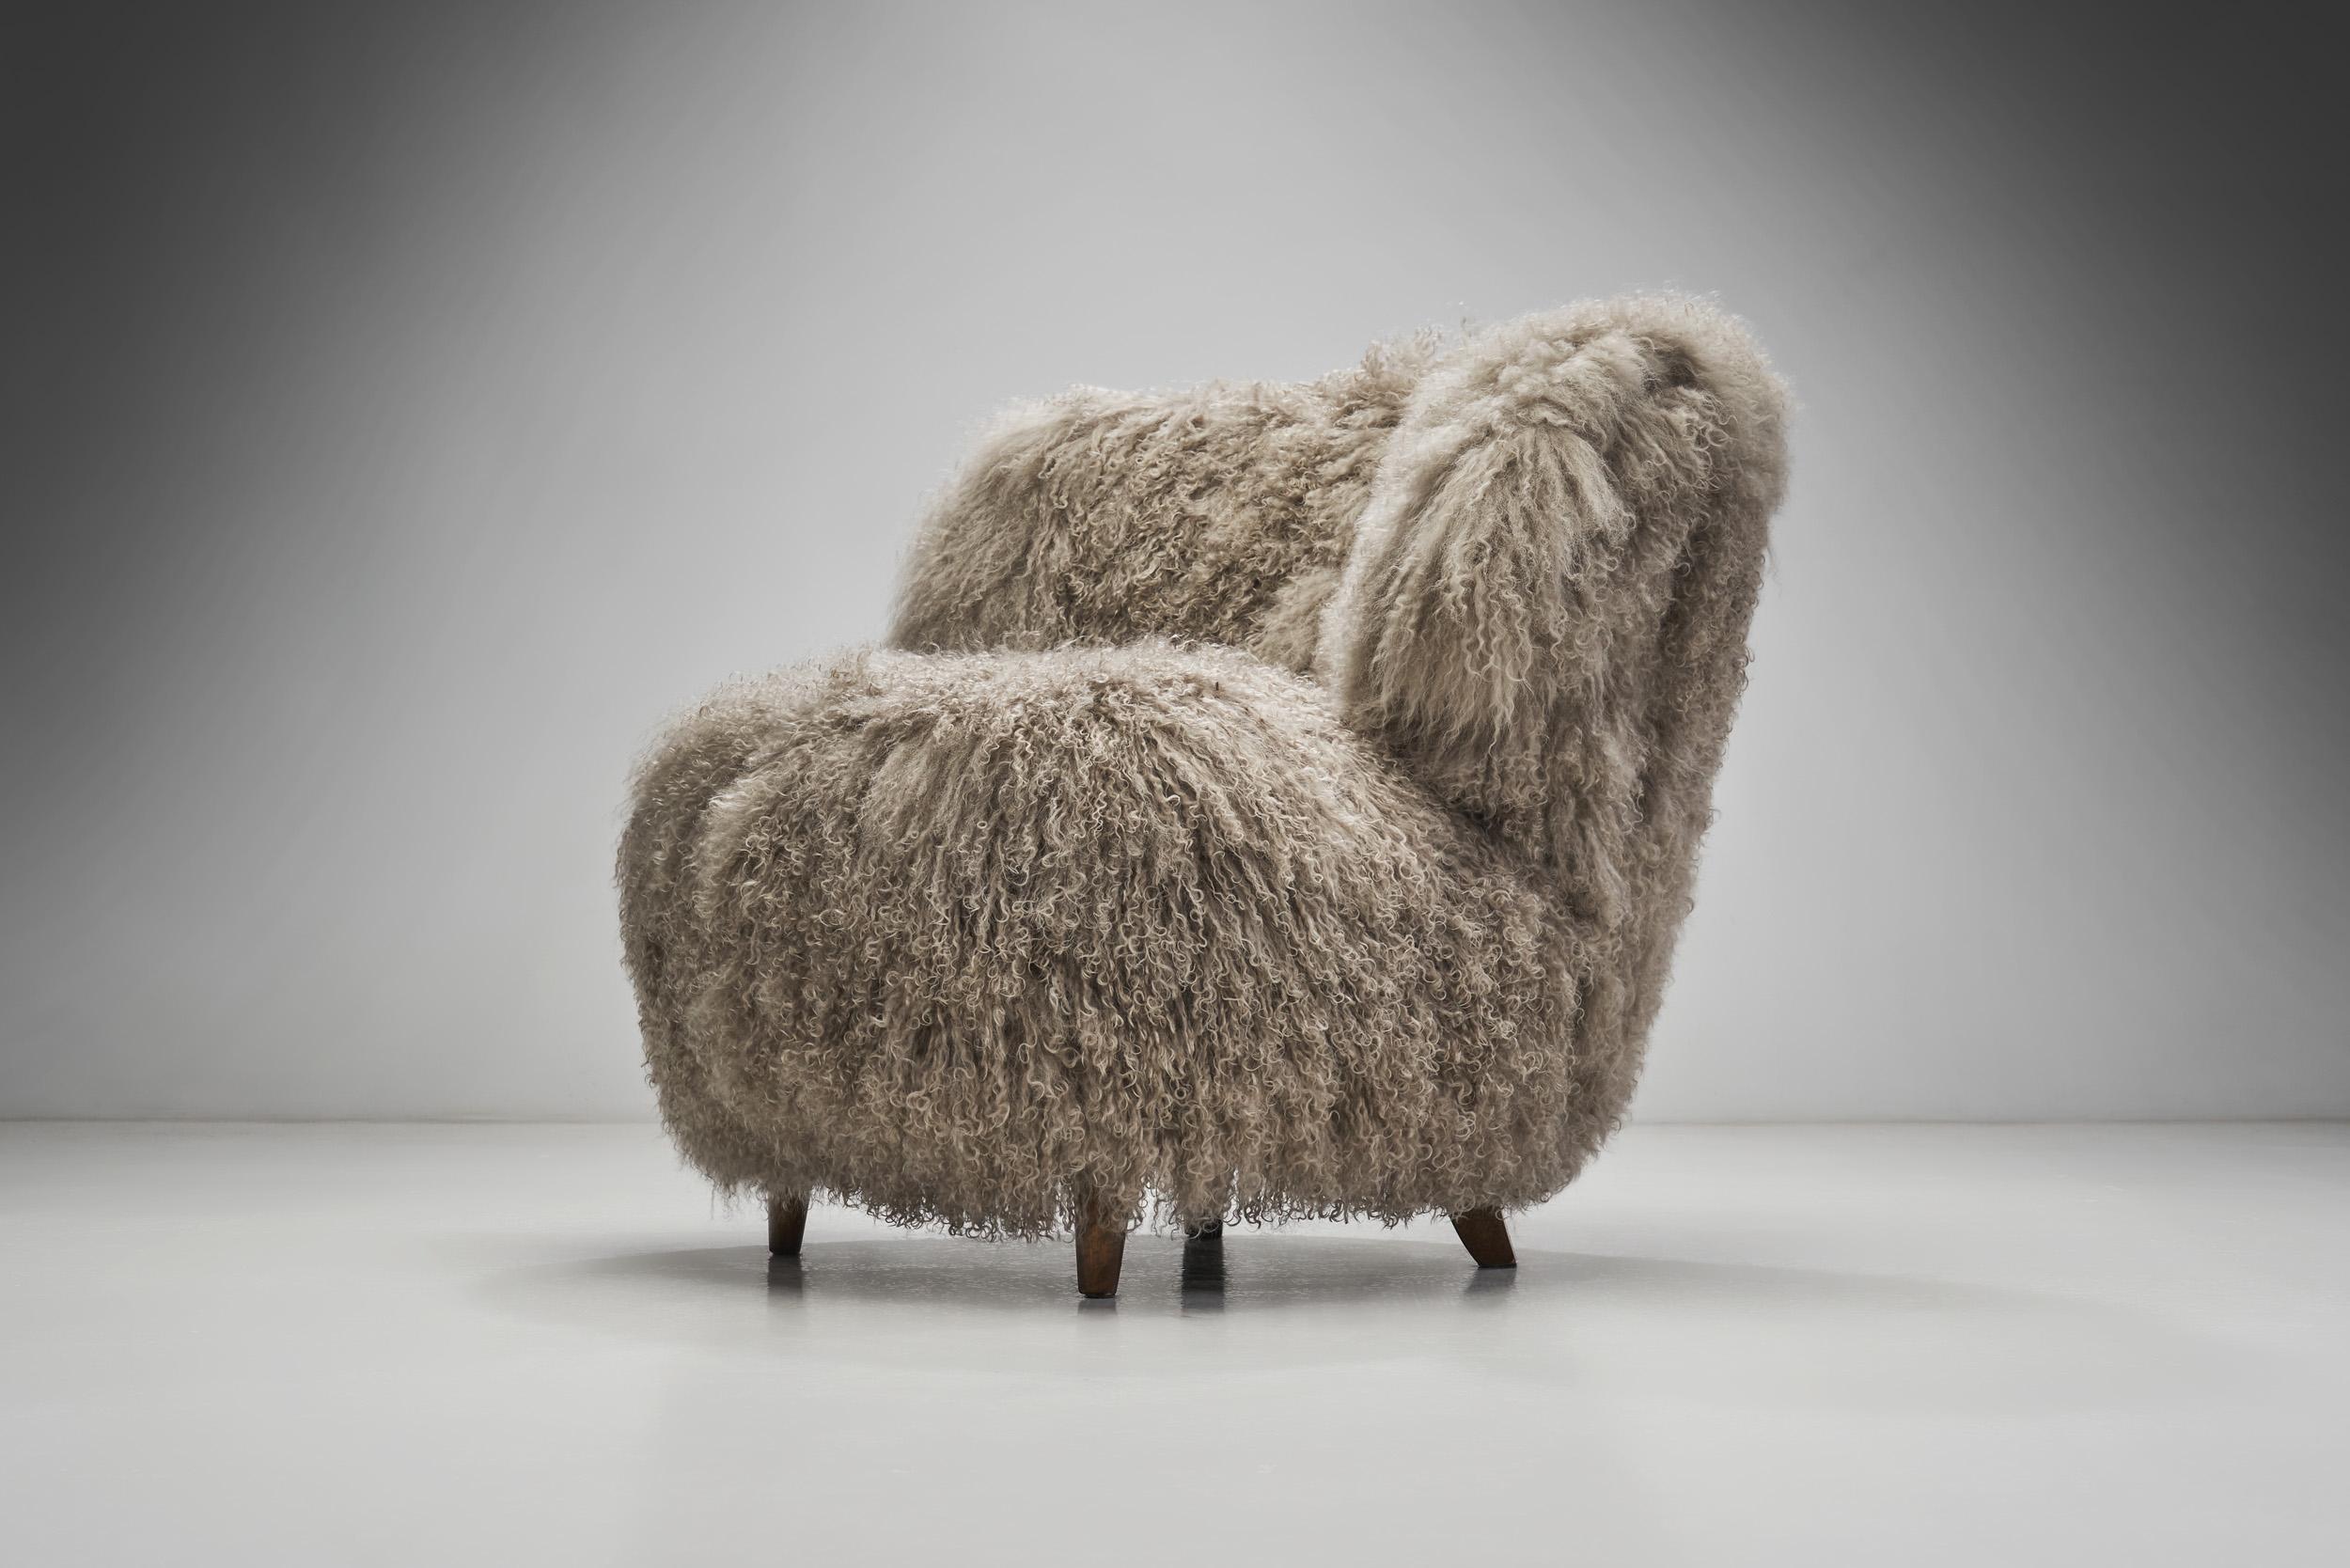 Nordic Modern Lounge Chairs in Mongolian Shearling, Finland ca 1950s For Sale 3